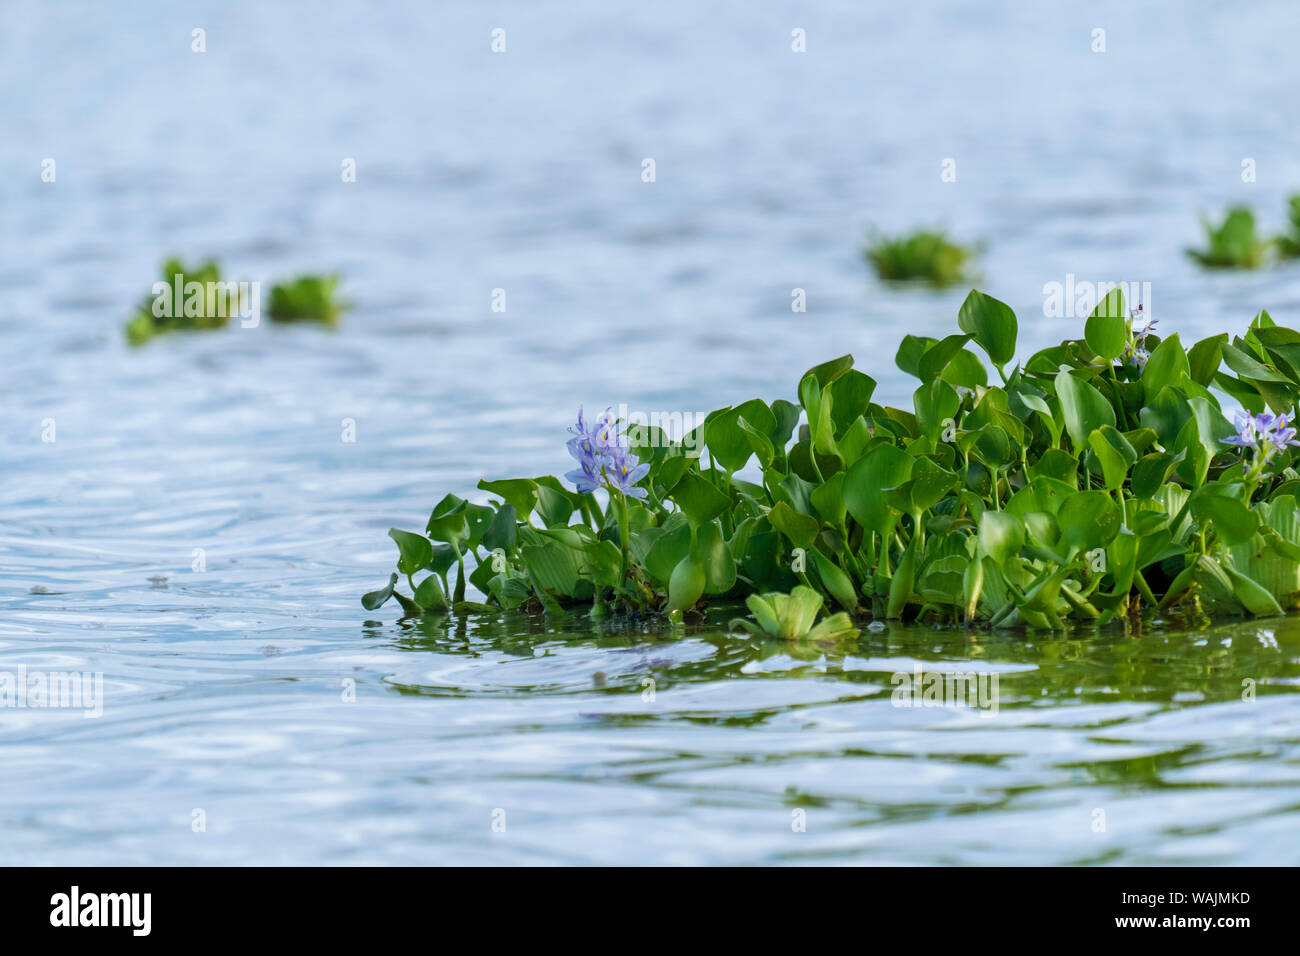 Pacaya Samiria Reserve, Peru. A water hyacinth blossom floats in the Maranon River, along with a water lettuce. Stock Photo